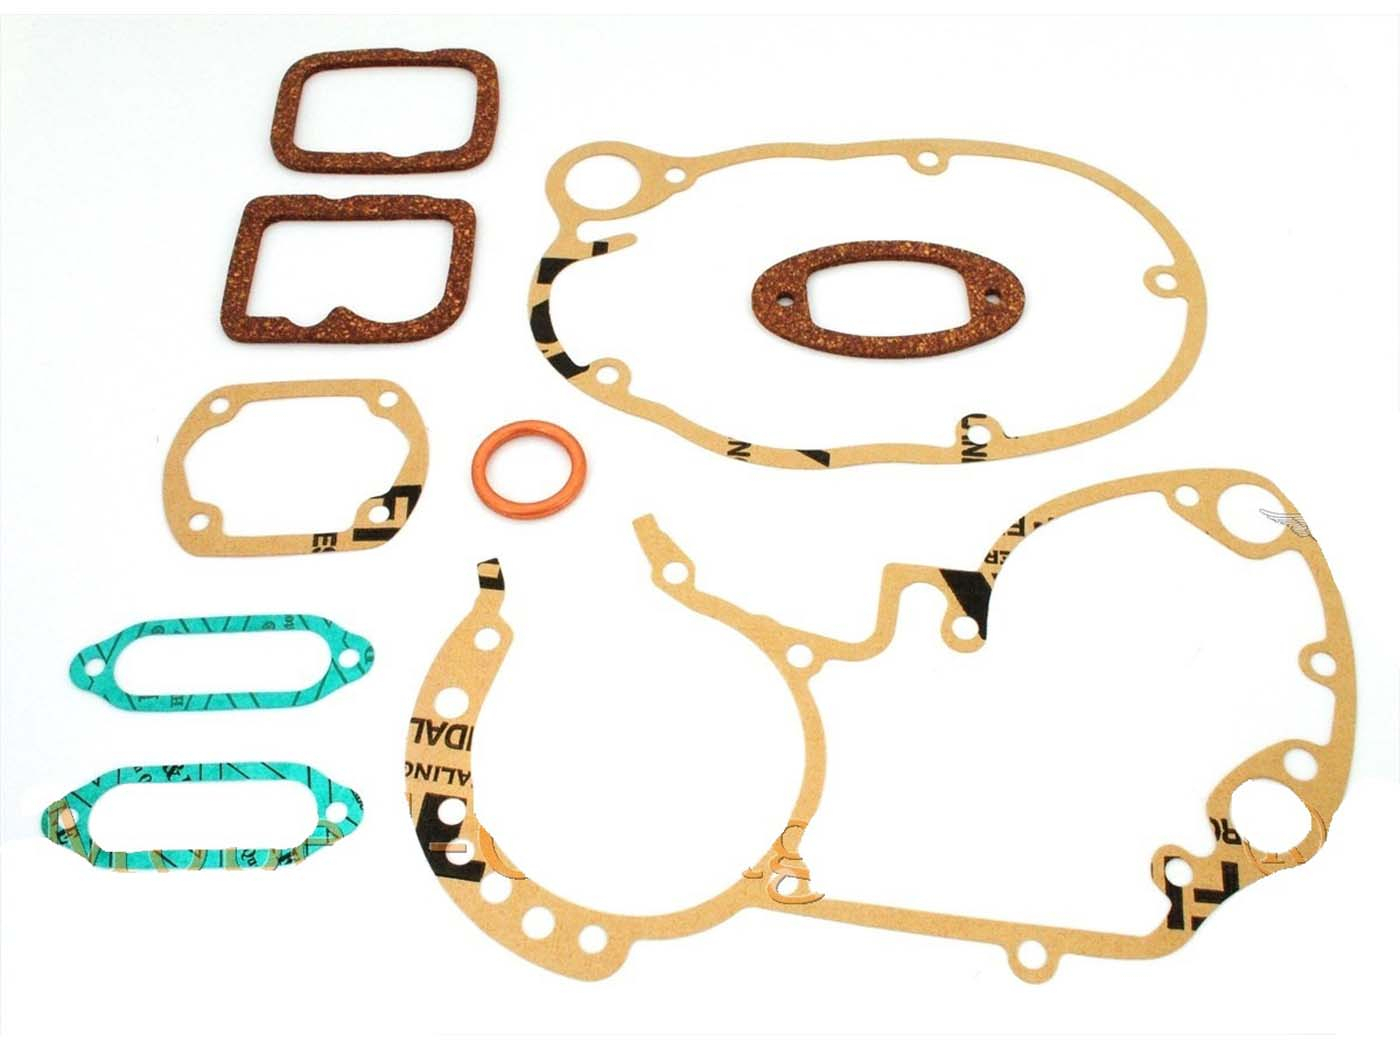 Engine Gasket Set 9-piece Diaphragm For Hercules Sachs 50 / 2 And 3 Speed Engine